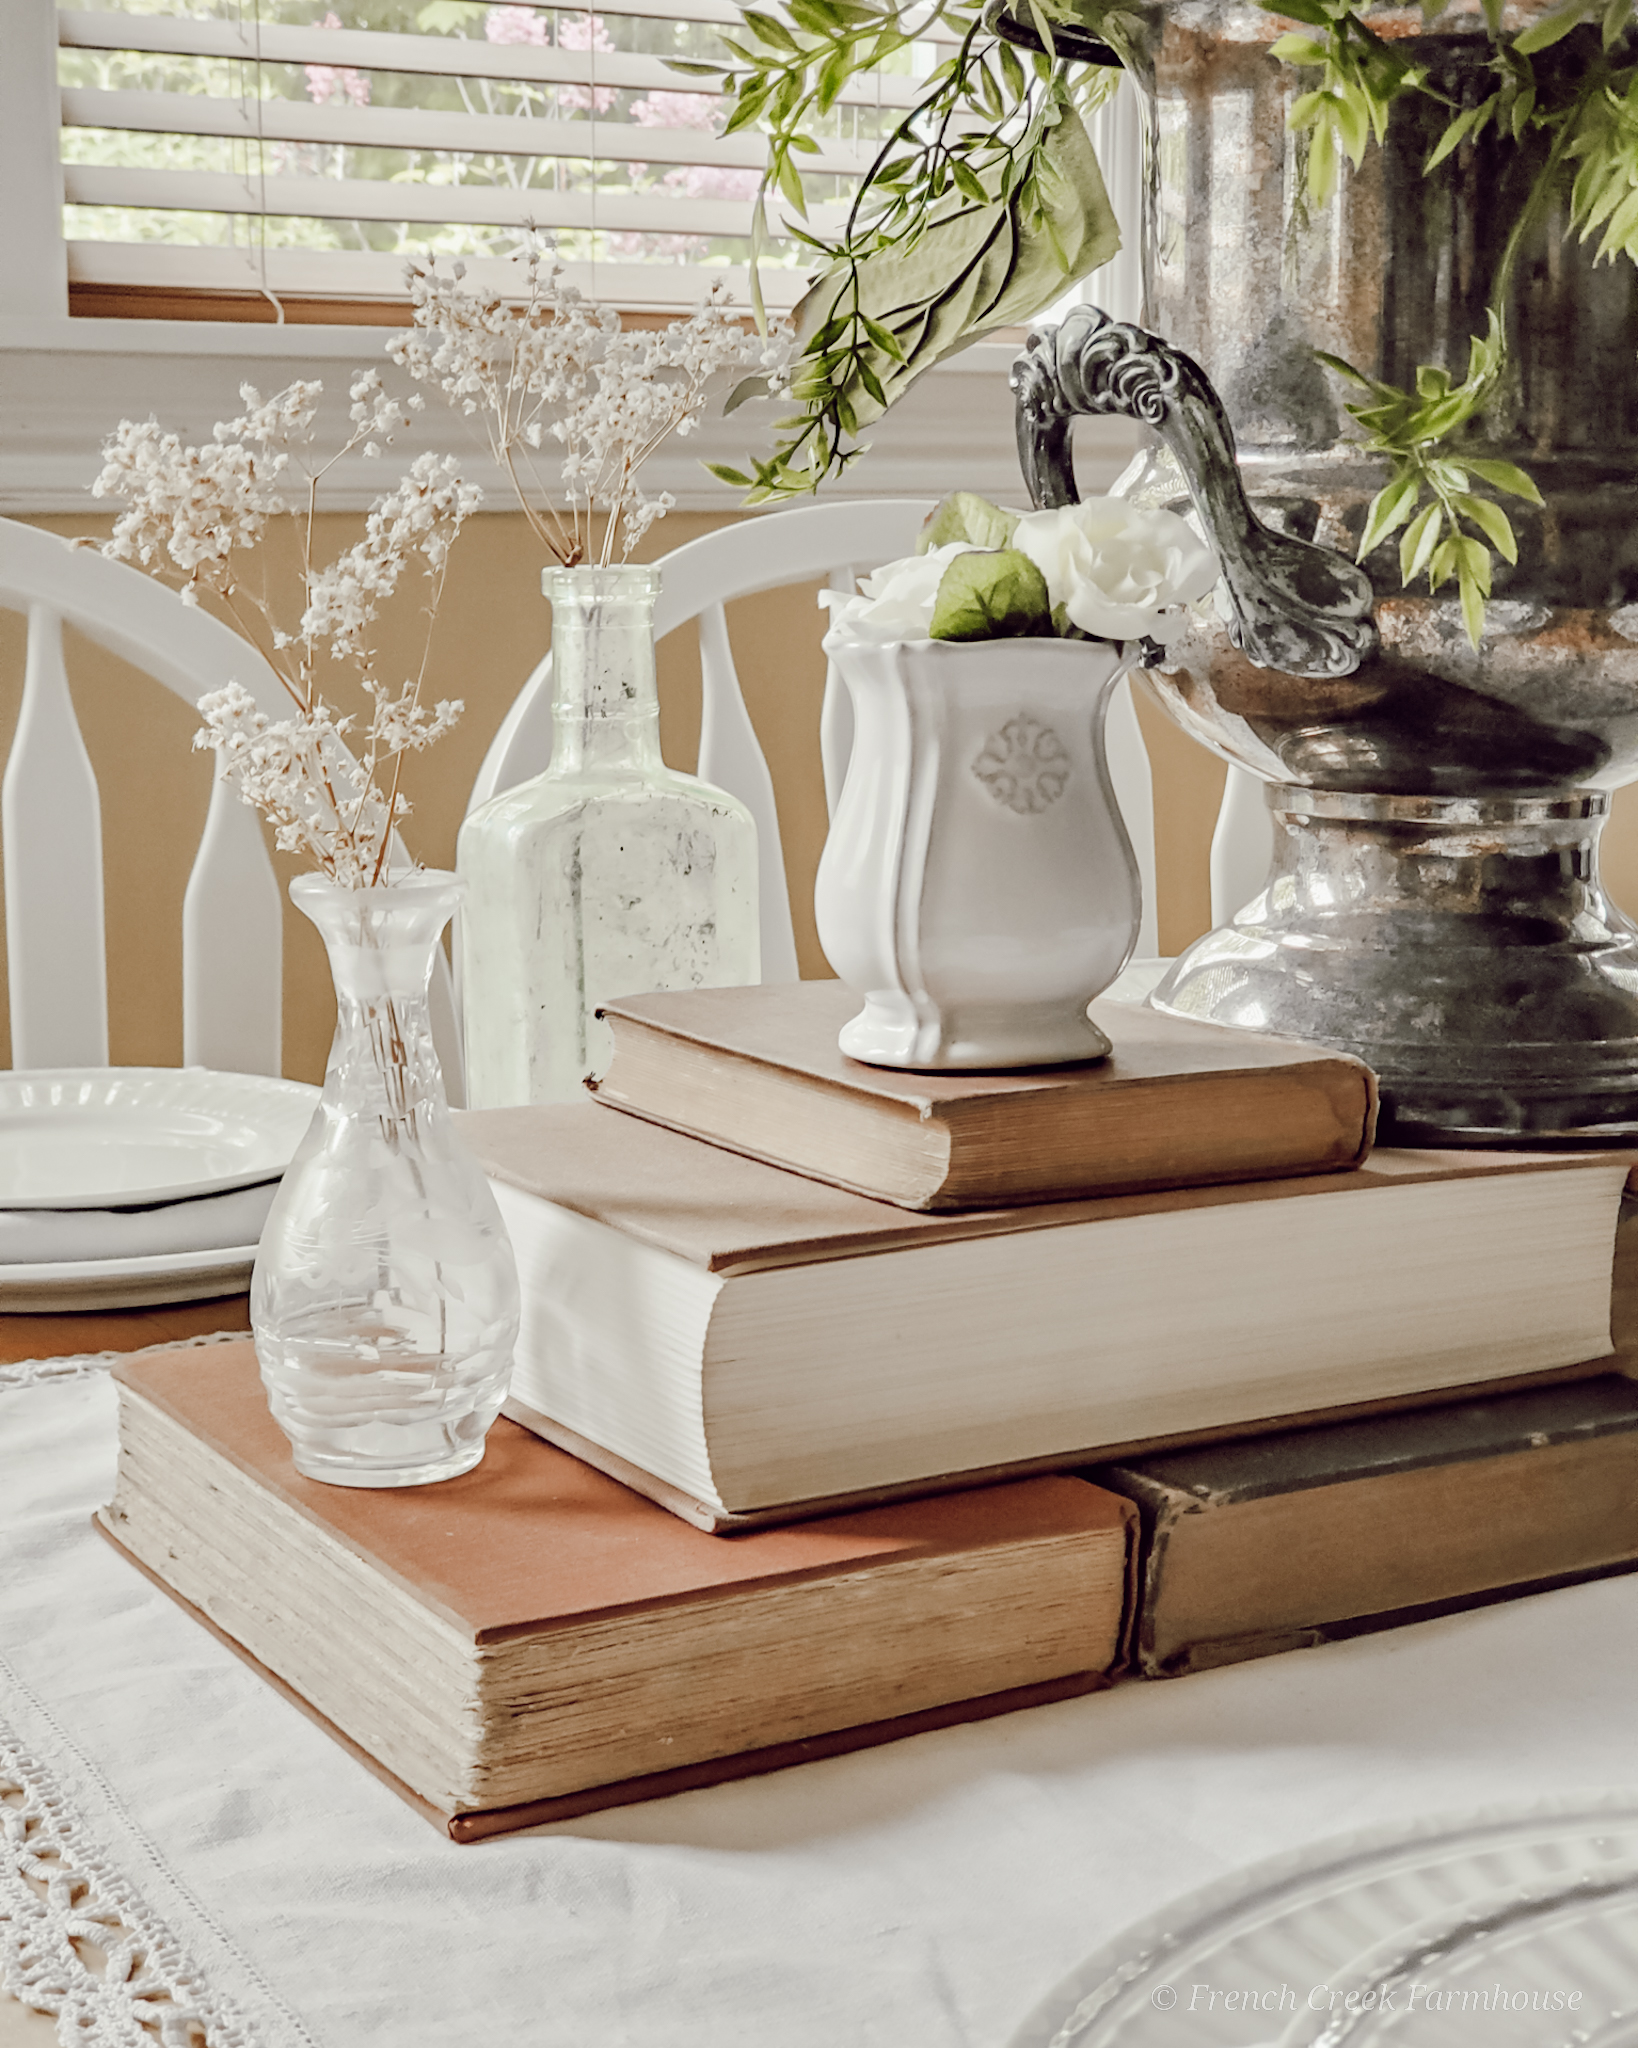 Old books used in a table centerpiece with vintage vases